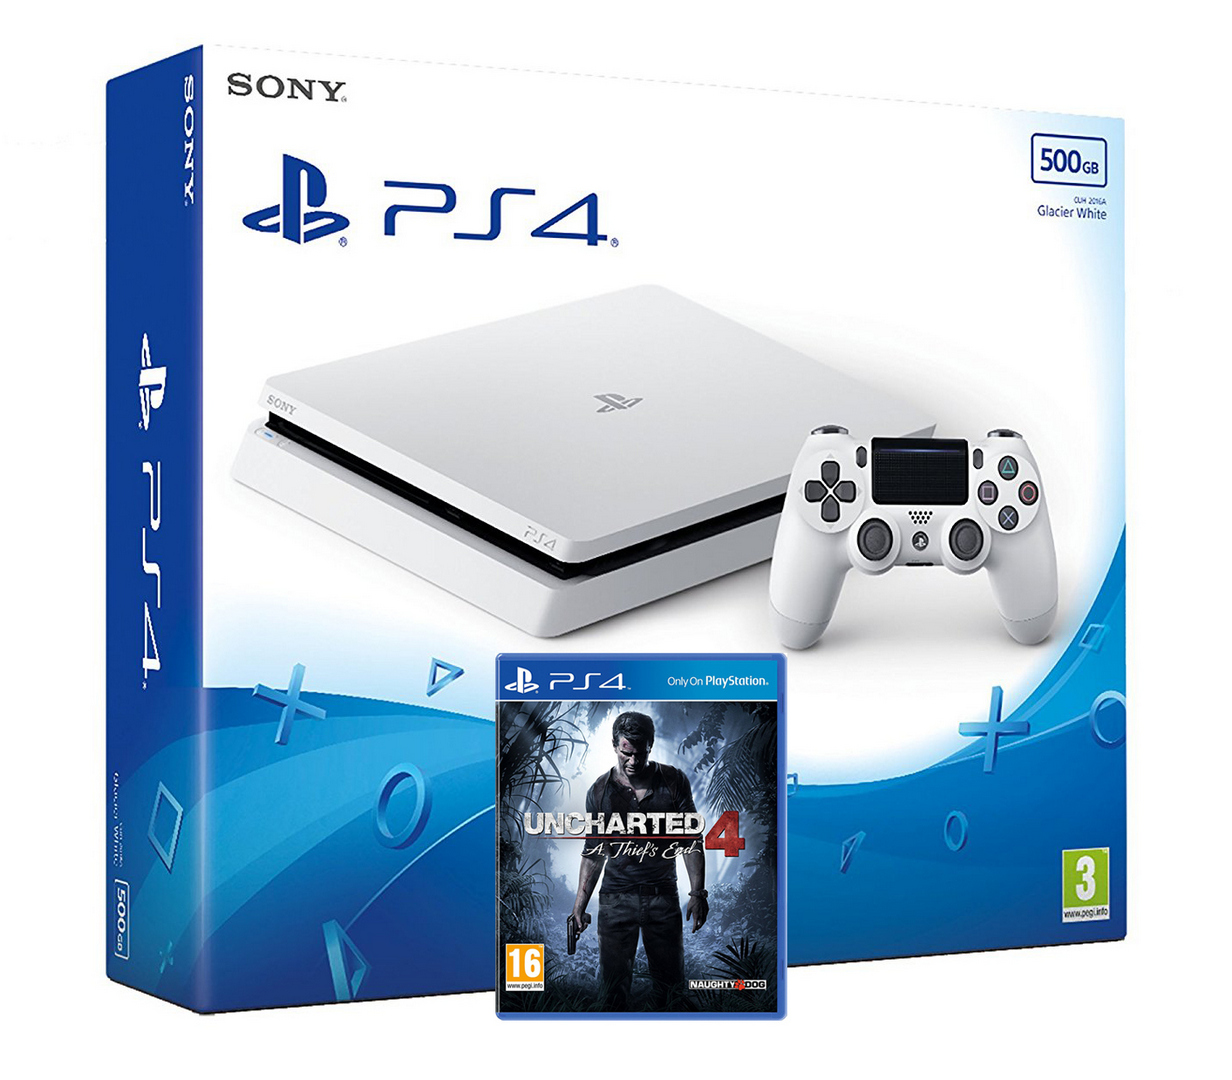 PlayStation 4 Slim 500 GB - Glacier White incl. Uncharted 4